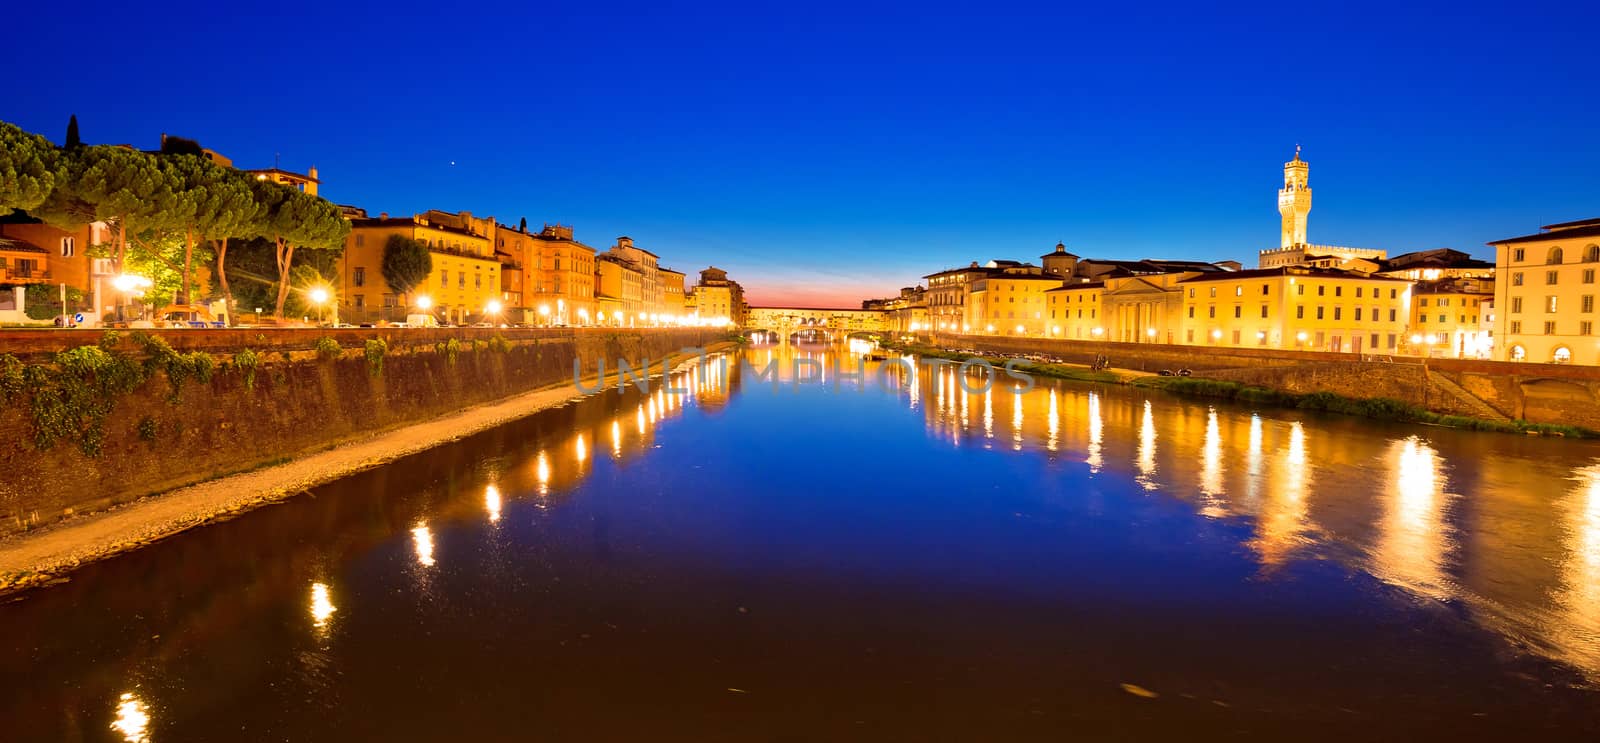 Ponte Vecchio bridge and Arno river waterfront in Florence evening view, Tuscany region of Italy